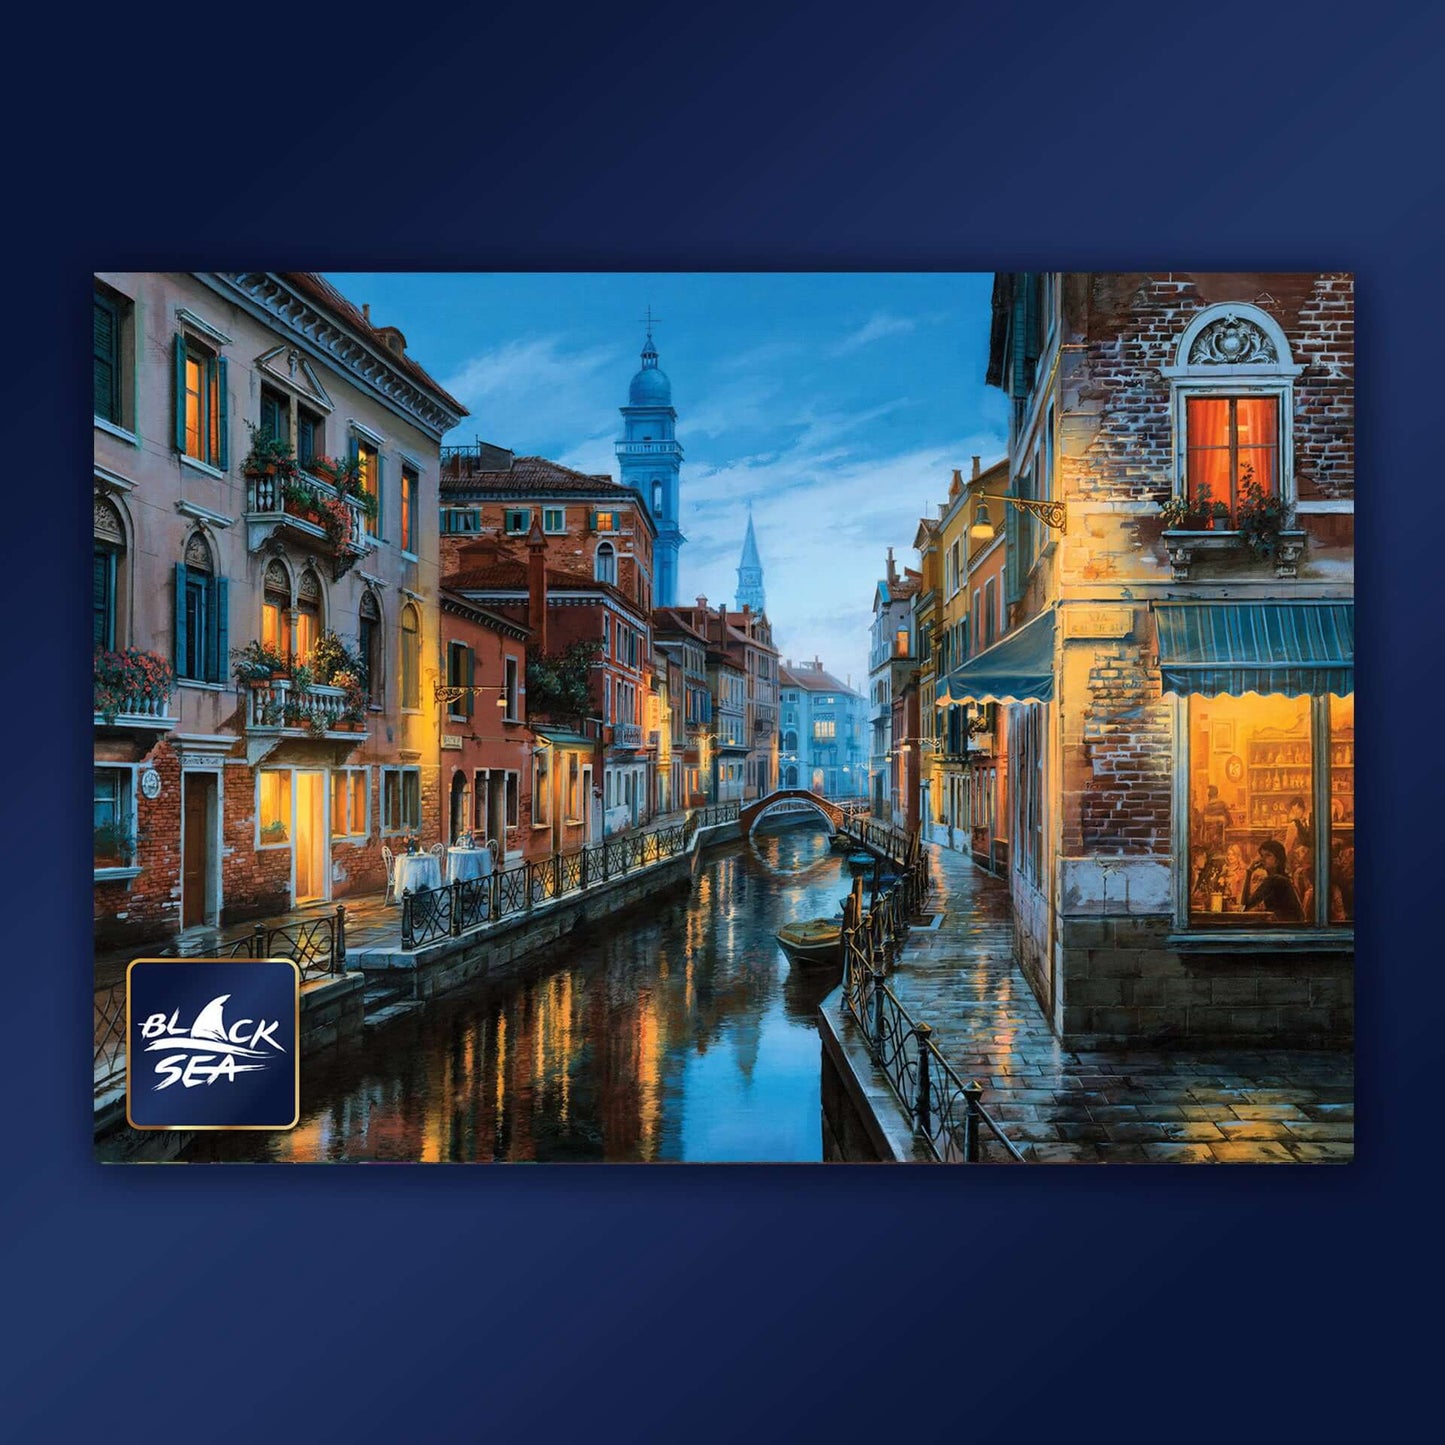 Puzzle Black Sea 1000 pieces - A table for one, The evening had just begun, and the nice little streets glowed gently under the soft light of the streetlamps. She was tired of the long day, so she went in the first café she saw. She ordered a cappuccino,